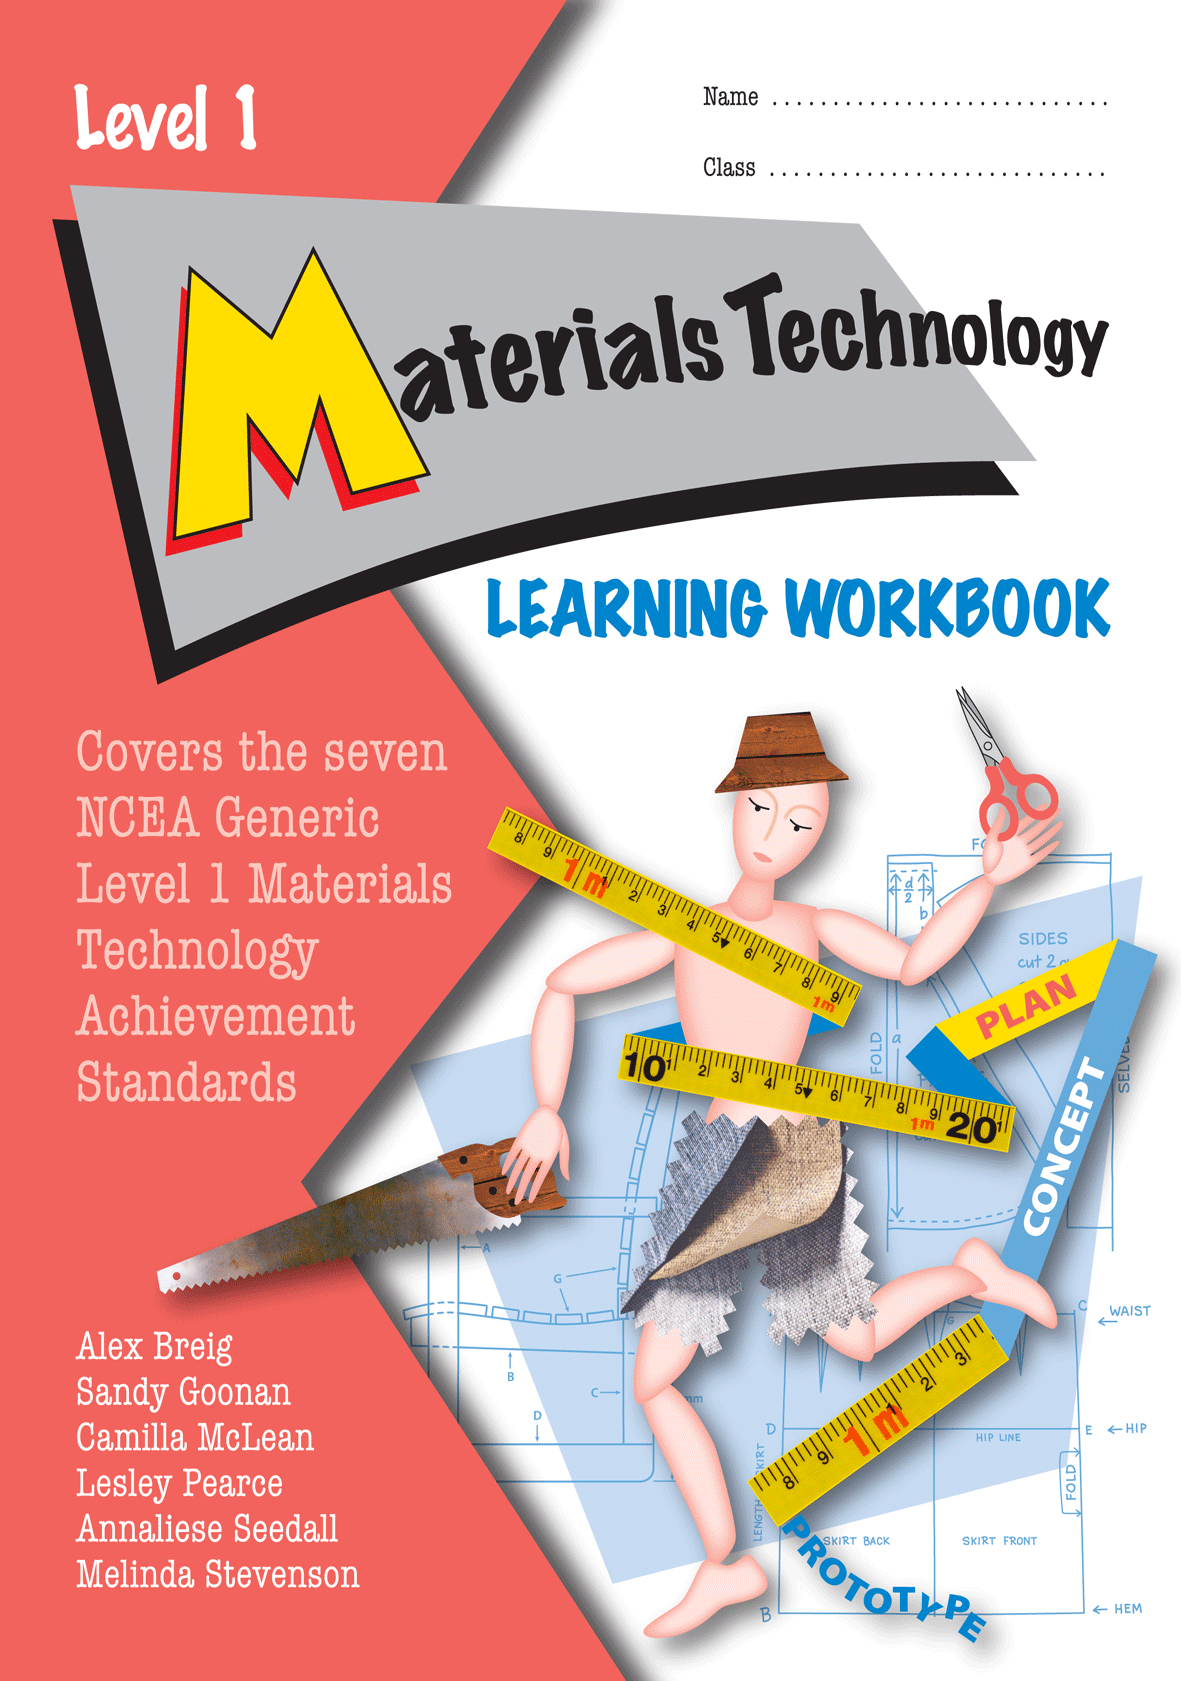 Level 1 Materials Technology Learning Workbook